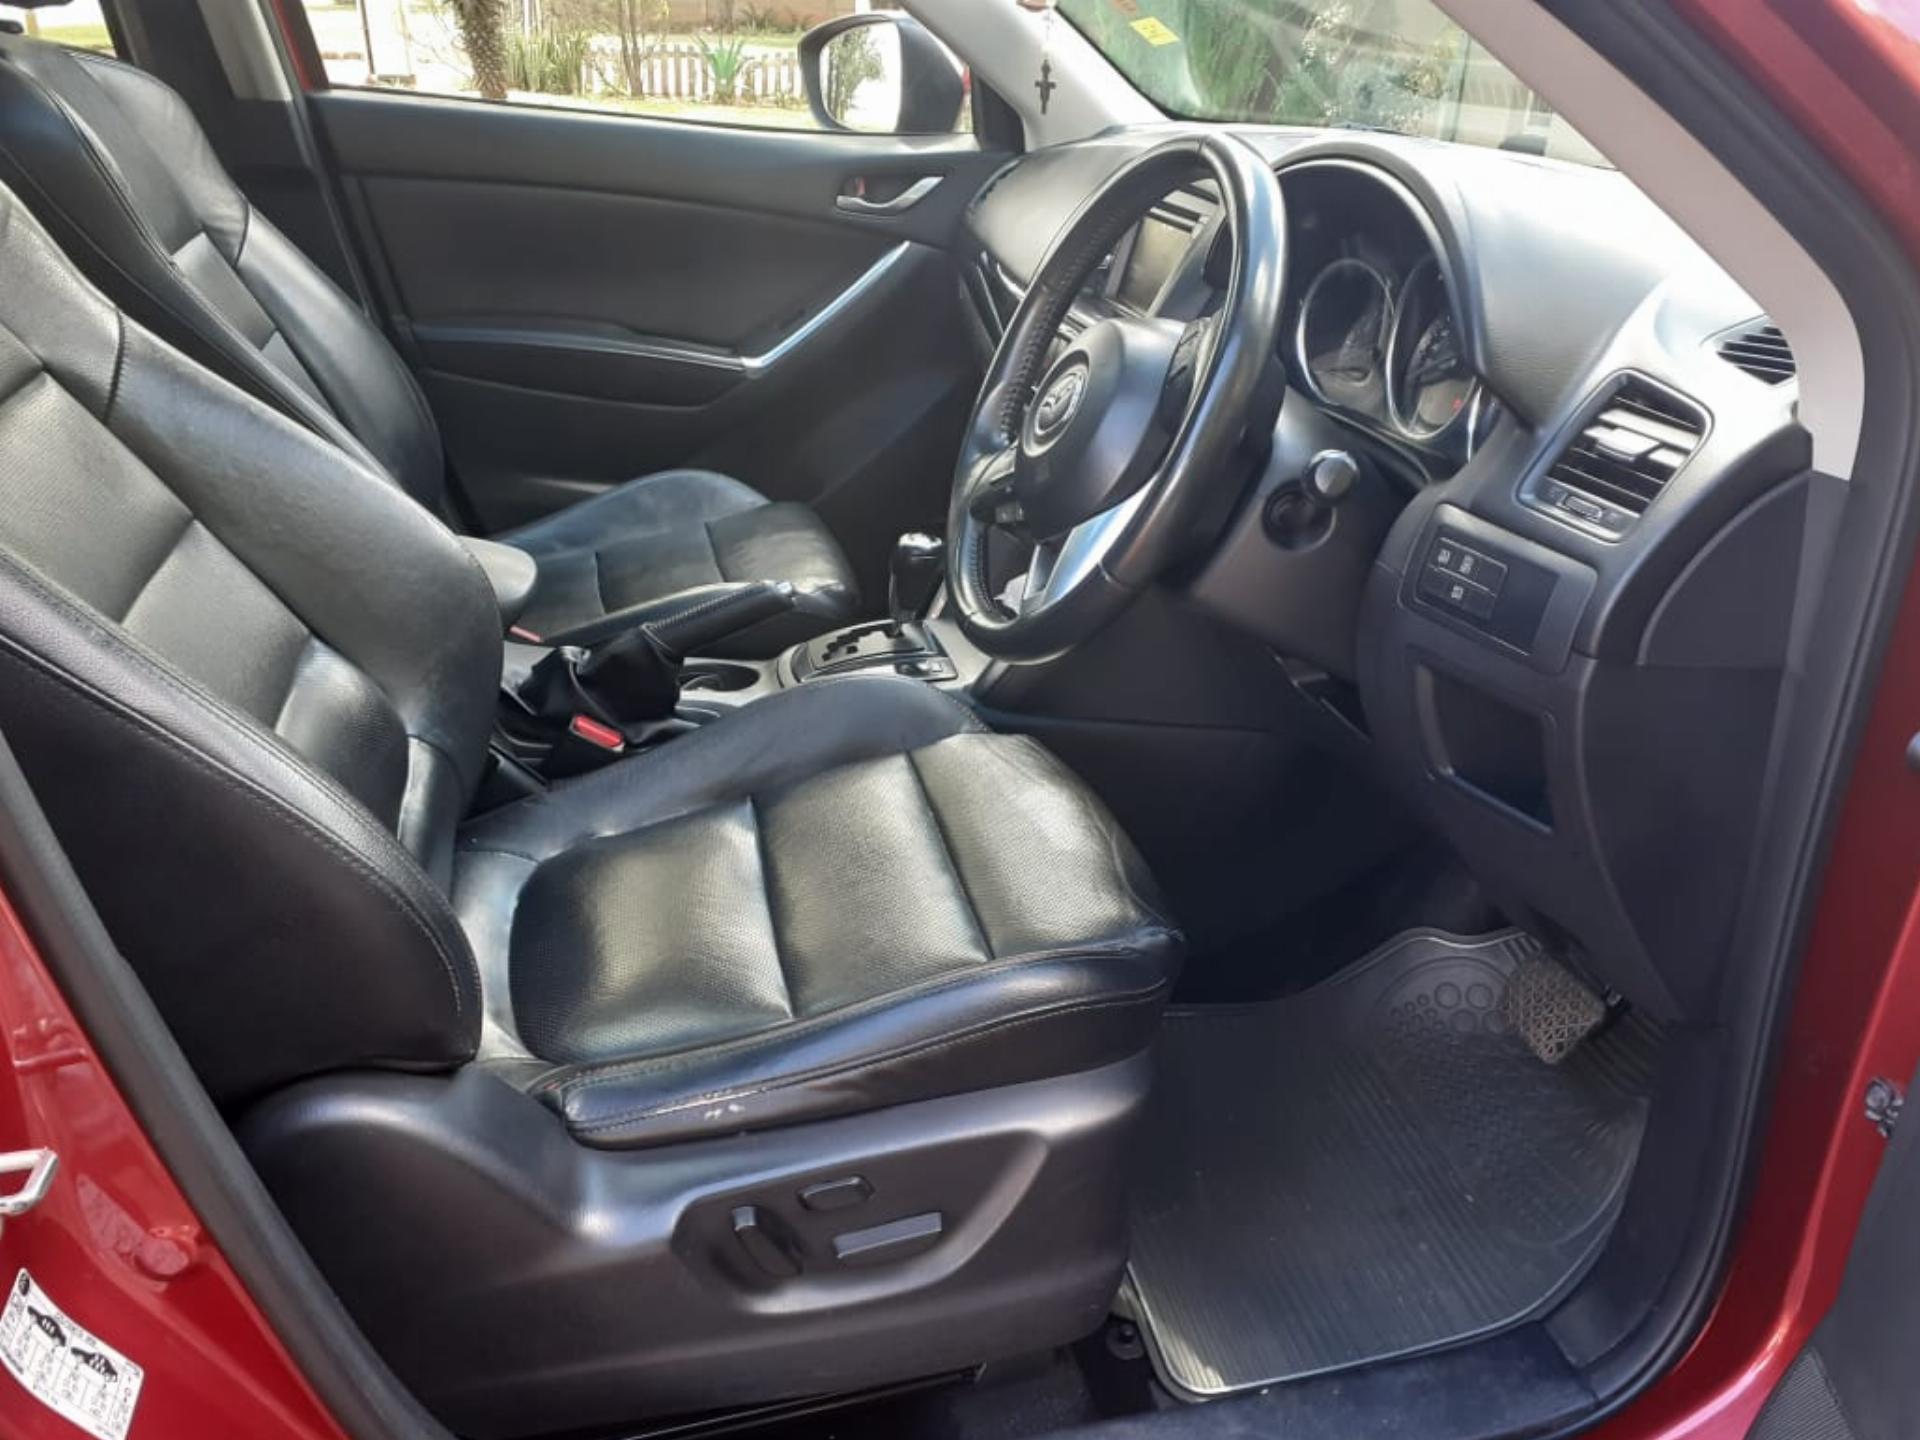 Mazda CX-5 Automatic With Sunroof